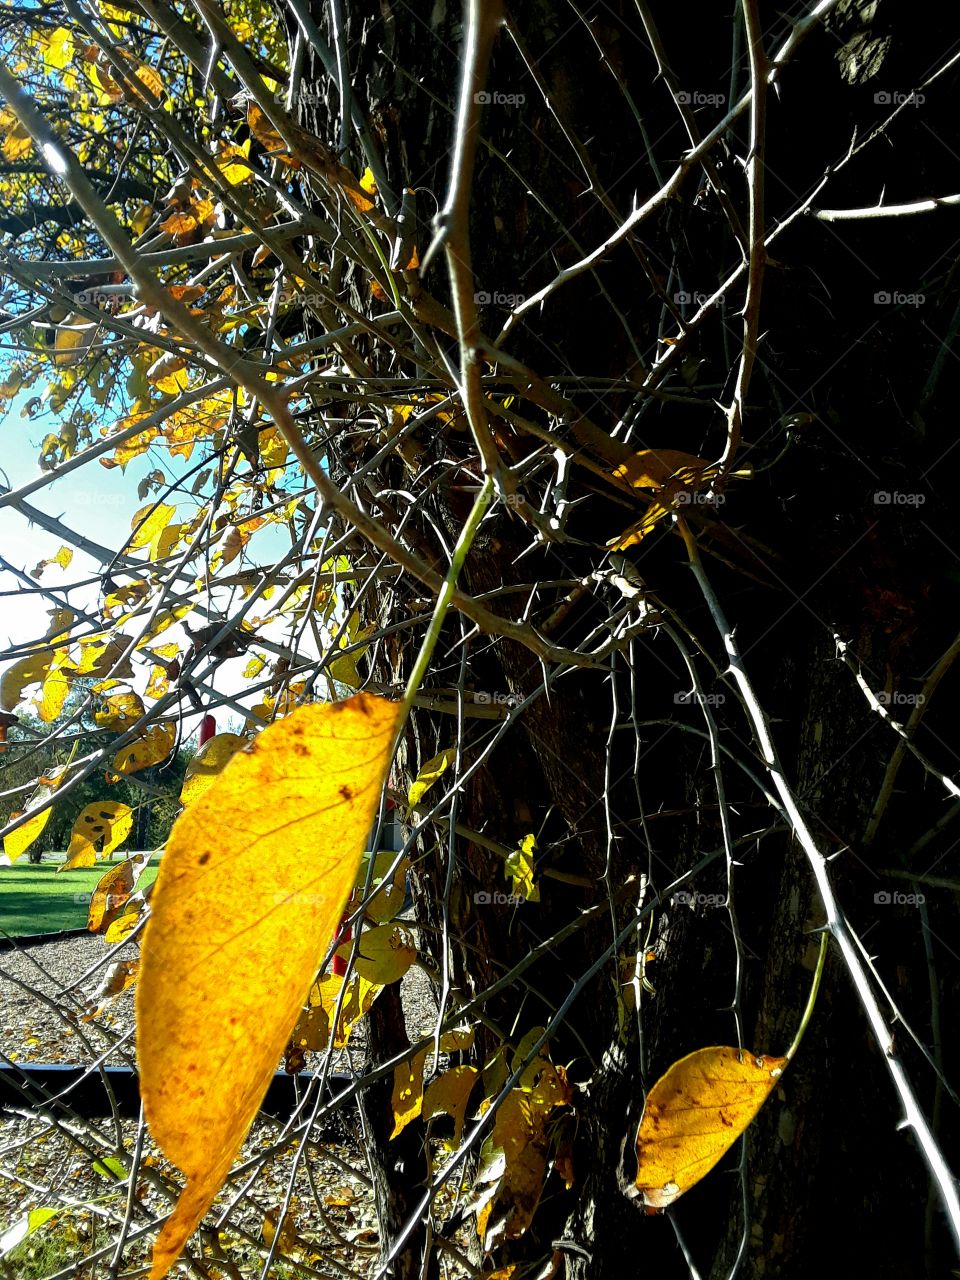 Thorny Tree with Golden Leaves